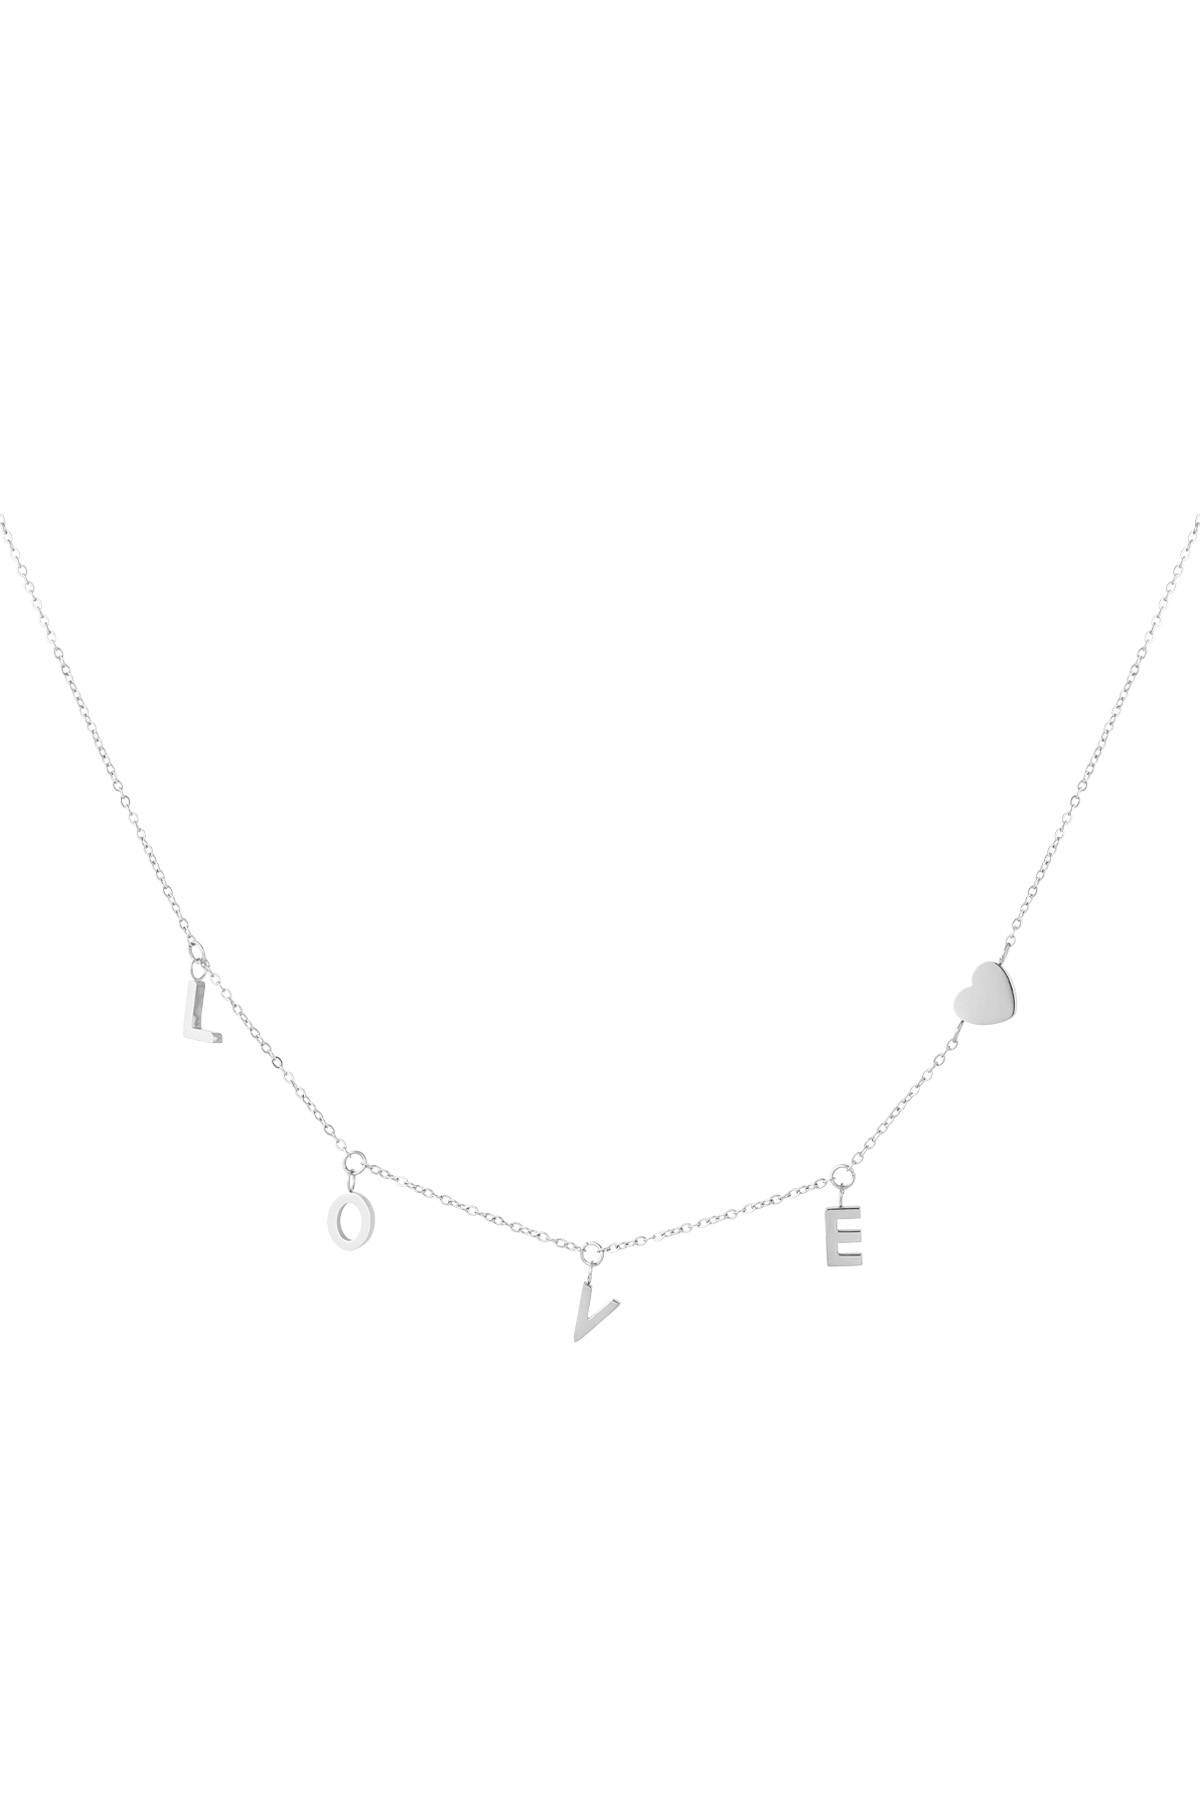 Necklace lover world - silver h5 